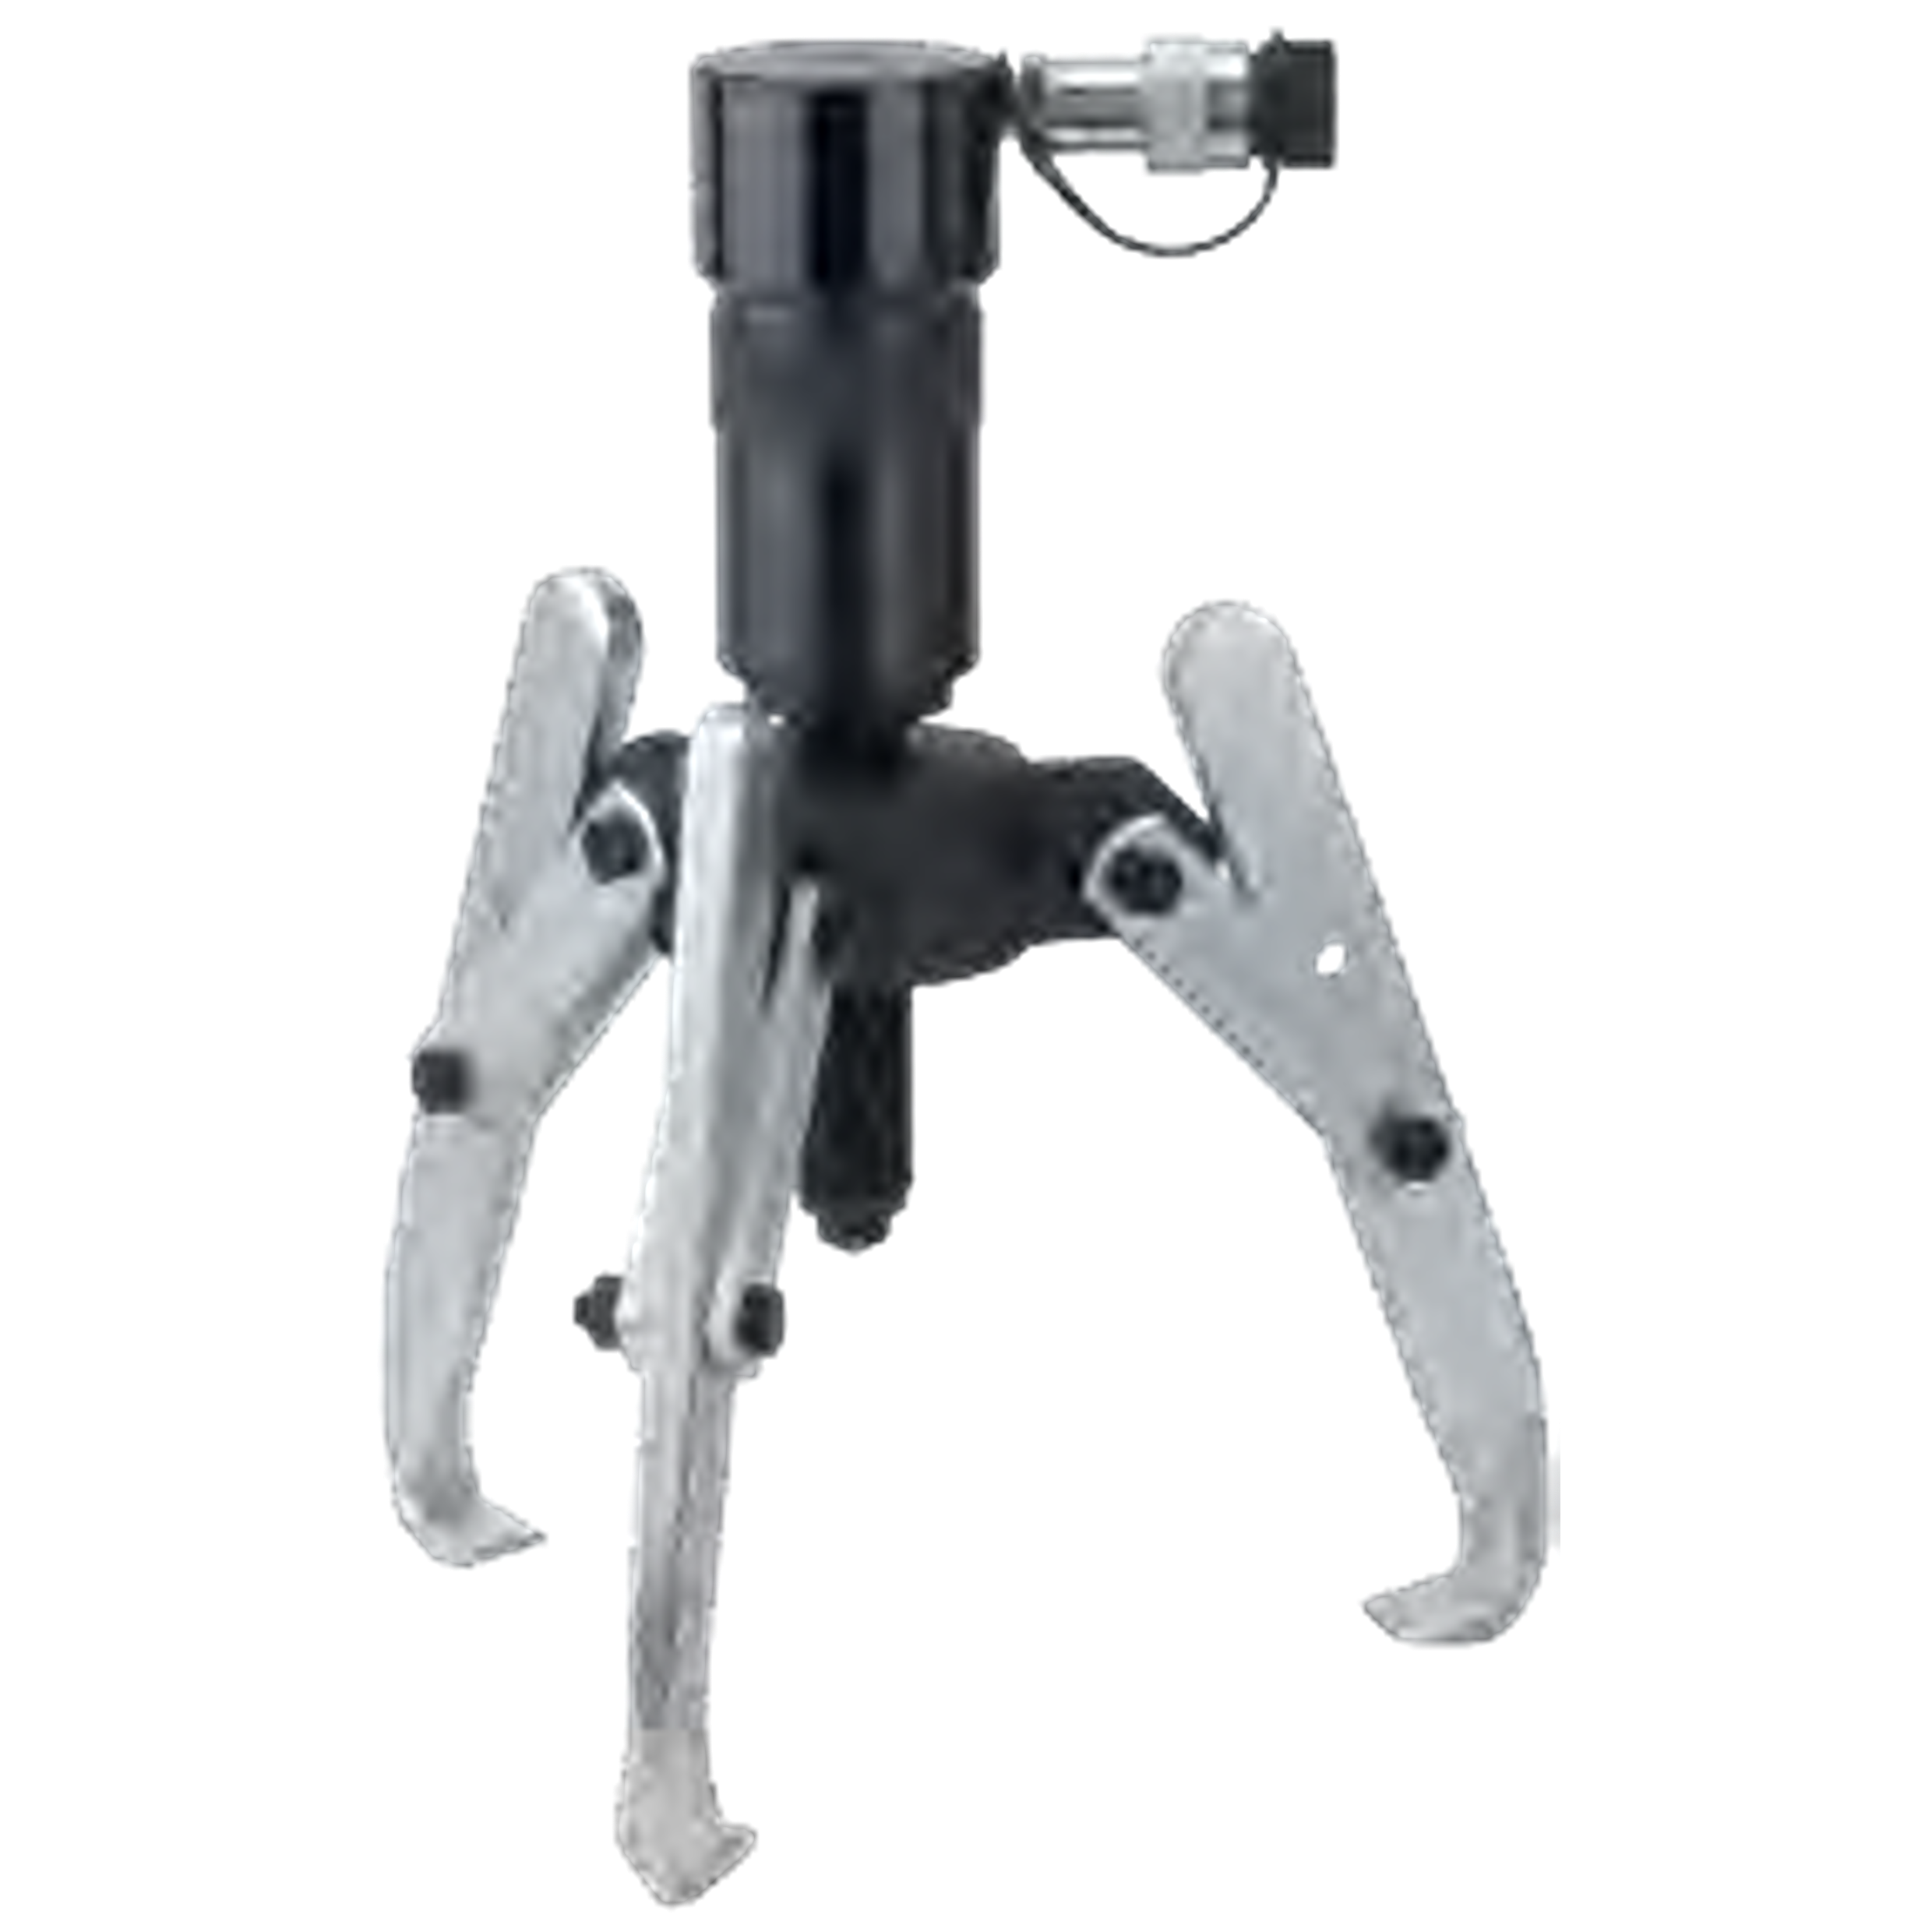 NEXUS HY116-17 3-Arm Hydraulic Puller With Threaded-Body - Premium 3-Arm Hydraulic Puller from NEXUS - Shop now at Yew Aik.